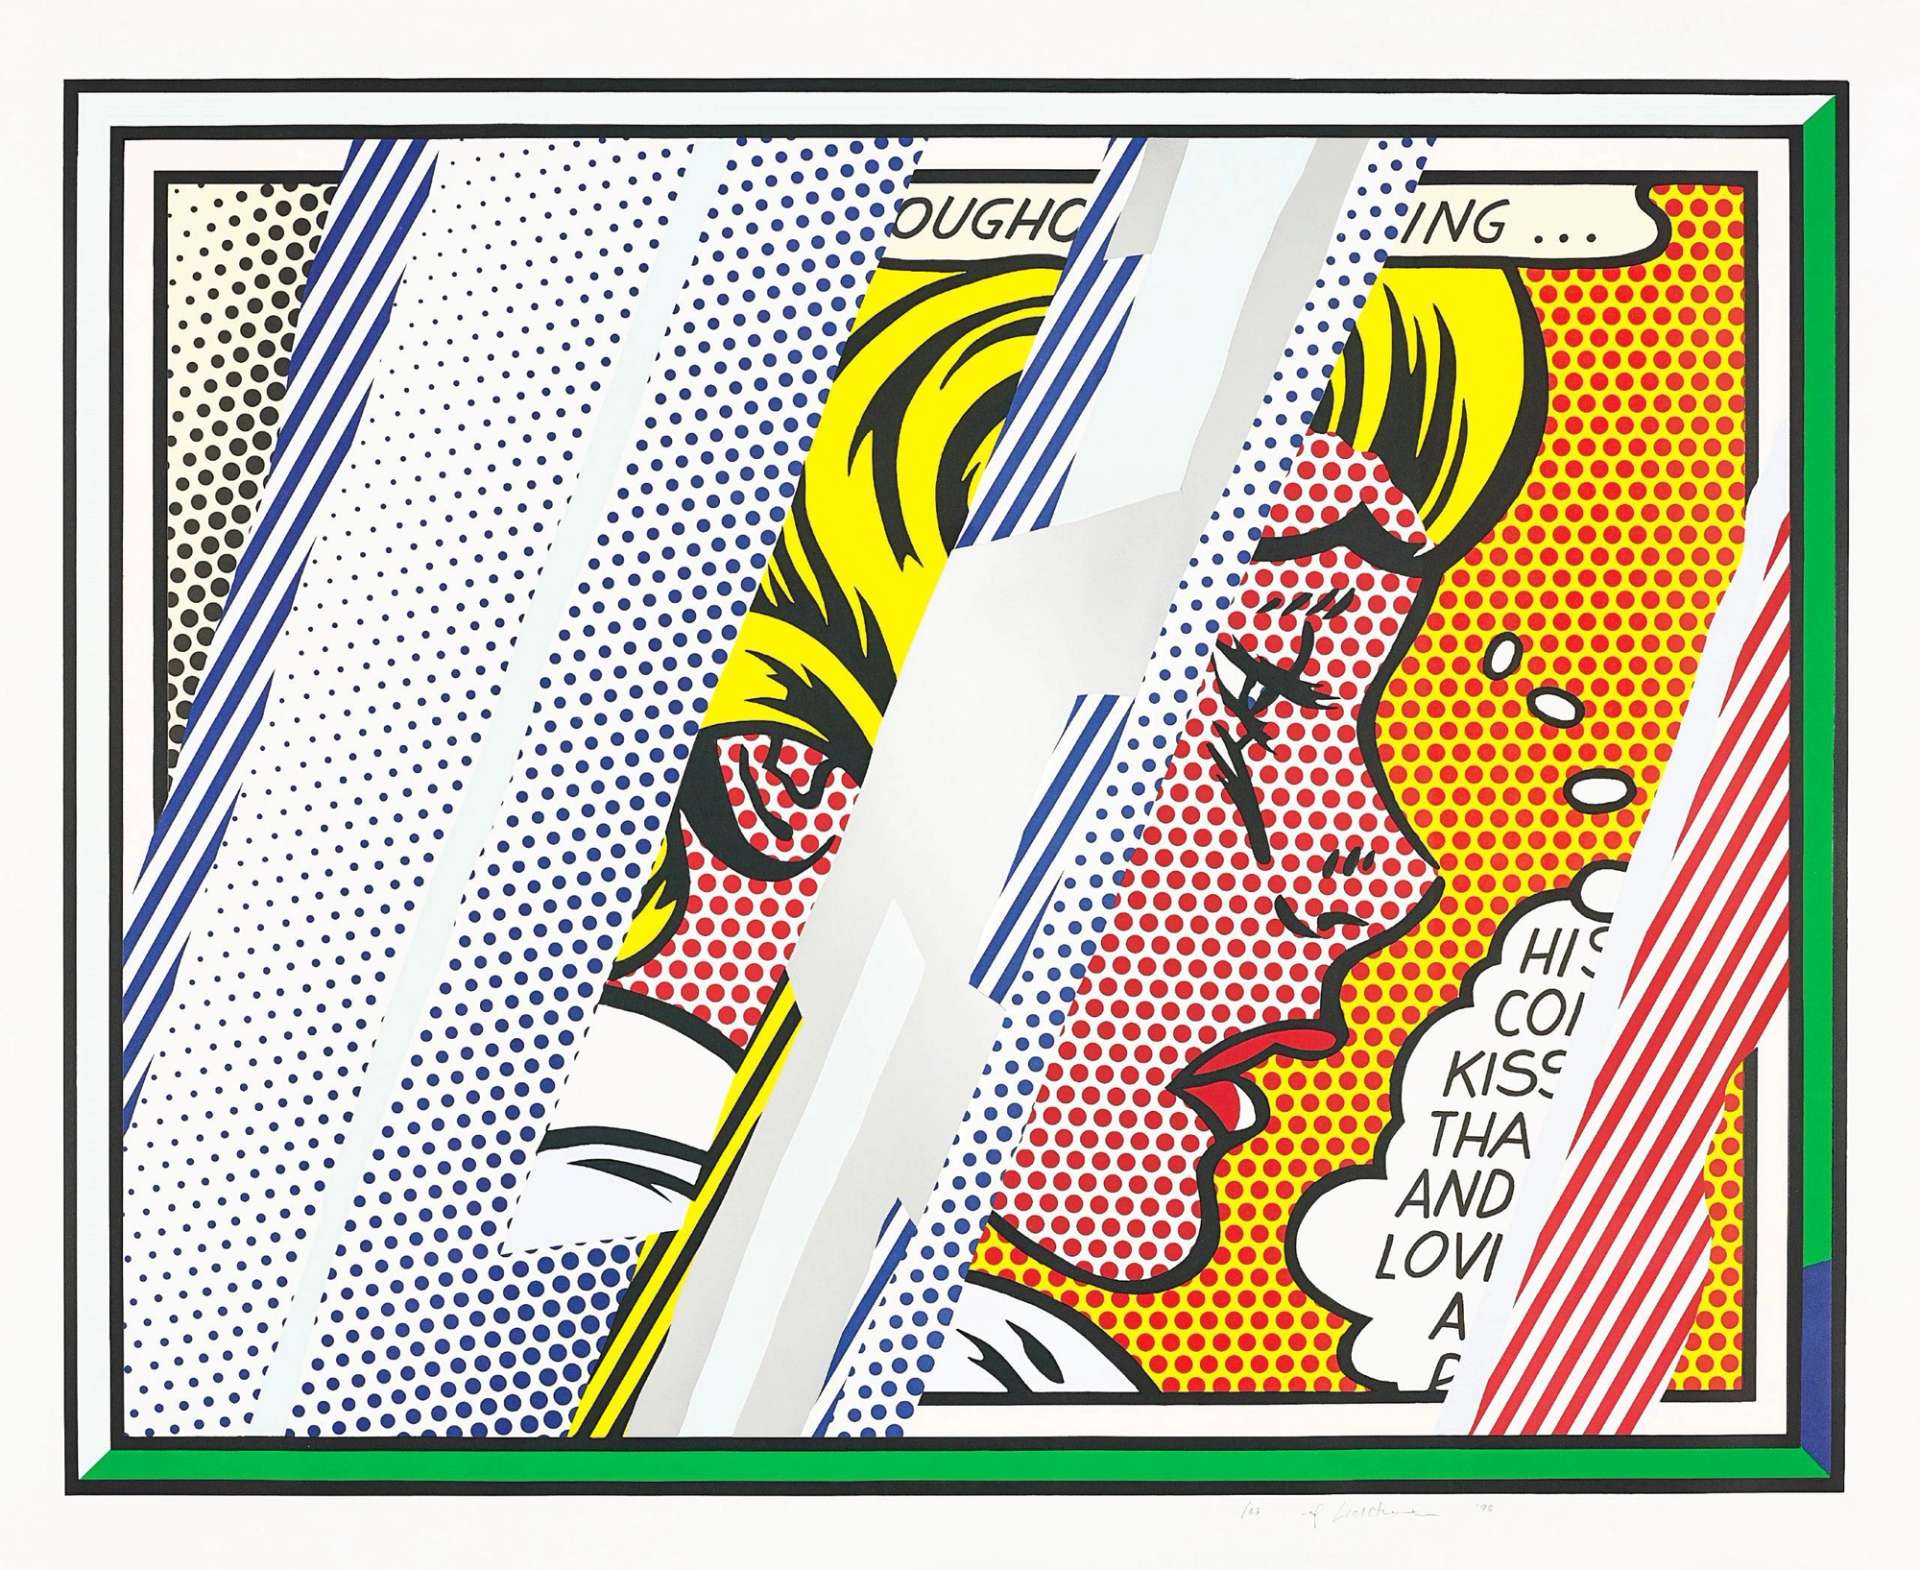 A lithograph and screenprint work by Roy Lichtenstein depicting a young cartoonish woman against an organge background, spliced by planes of white and grey that give the appearance of reflections.